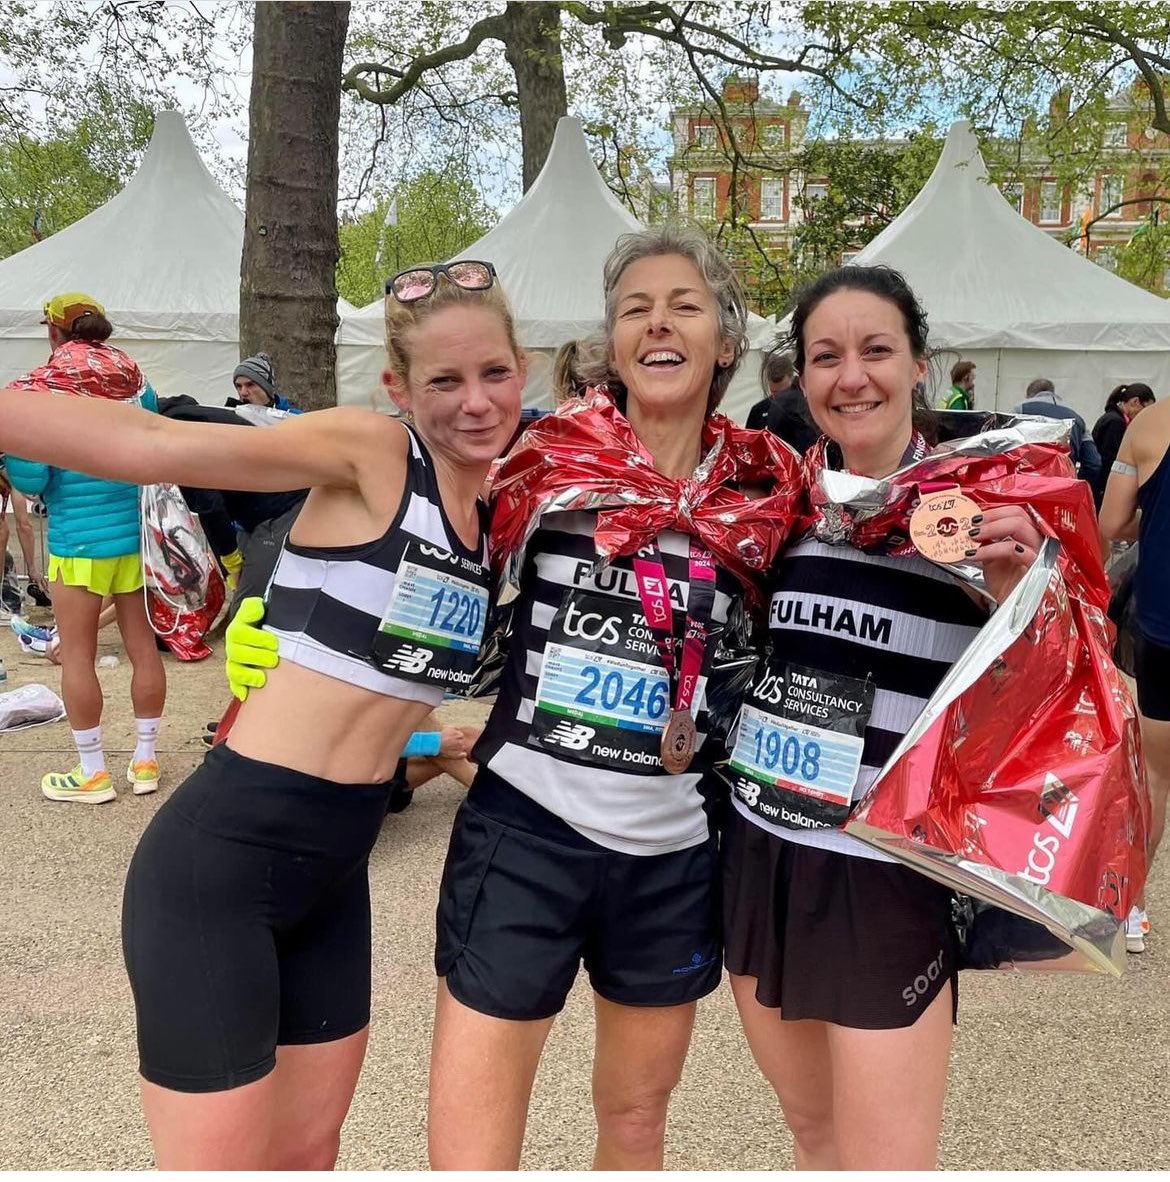 In the middle…my friend Alice Riddell-Webster. She’ll kill me for saying this but 57 years old and she ran @LondonMarathon in 2:58:15 I think she is sensational 👏